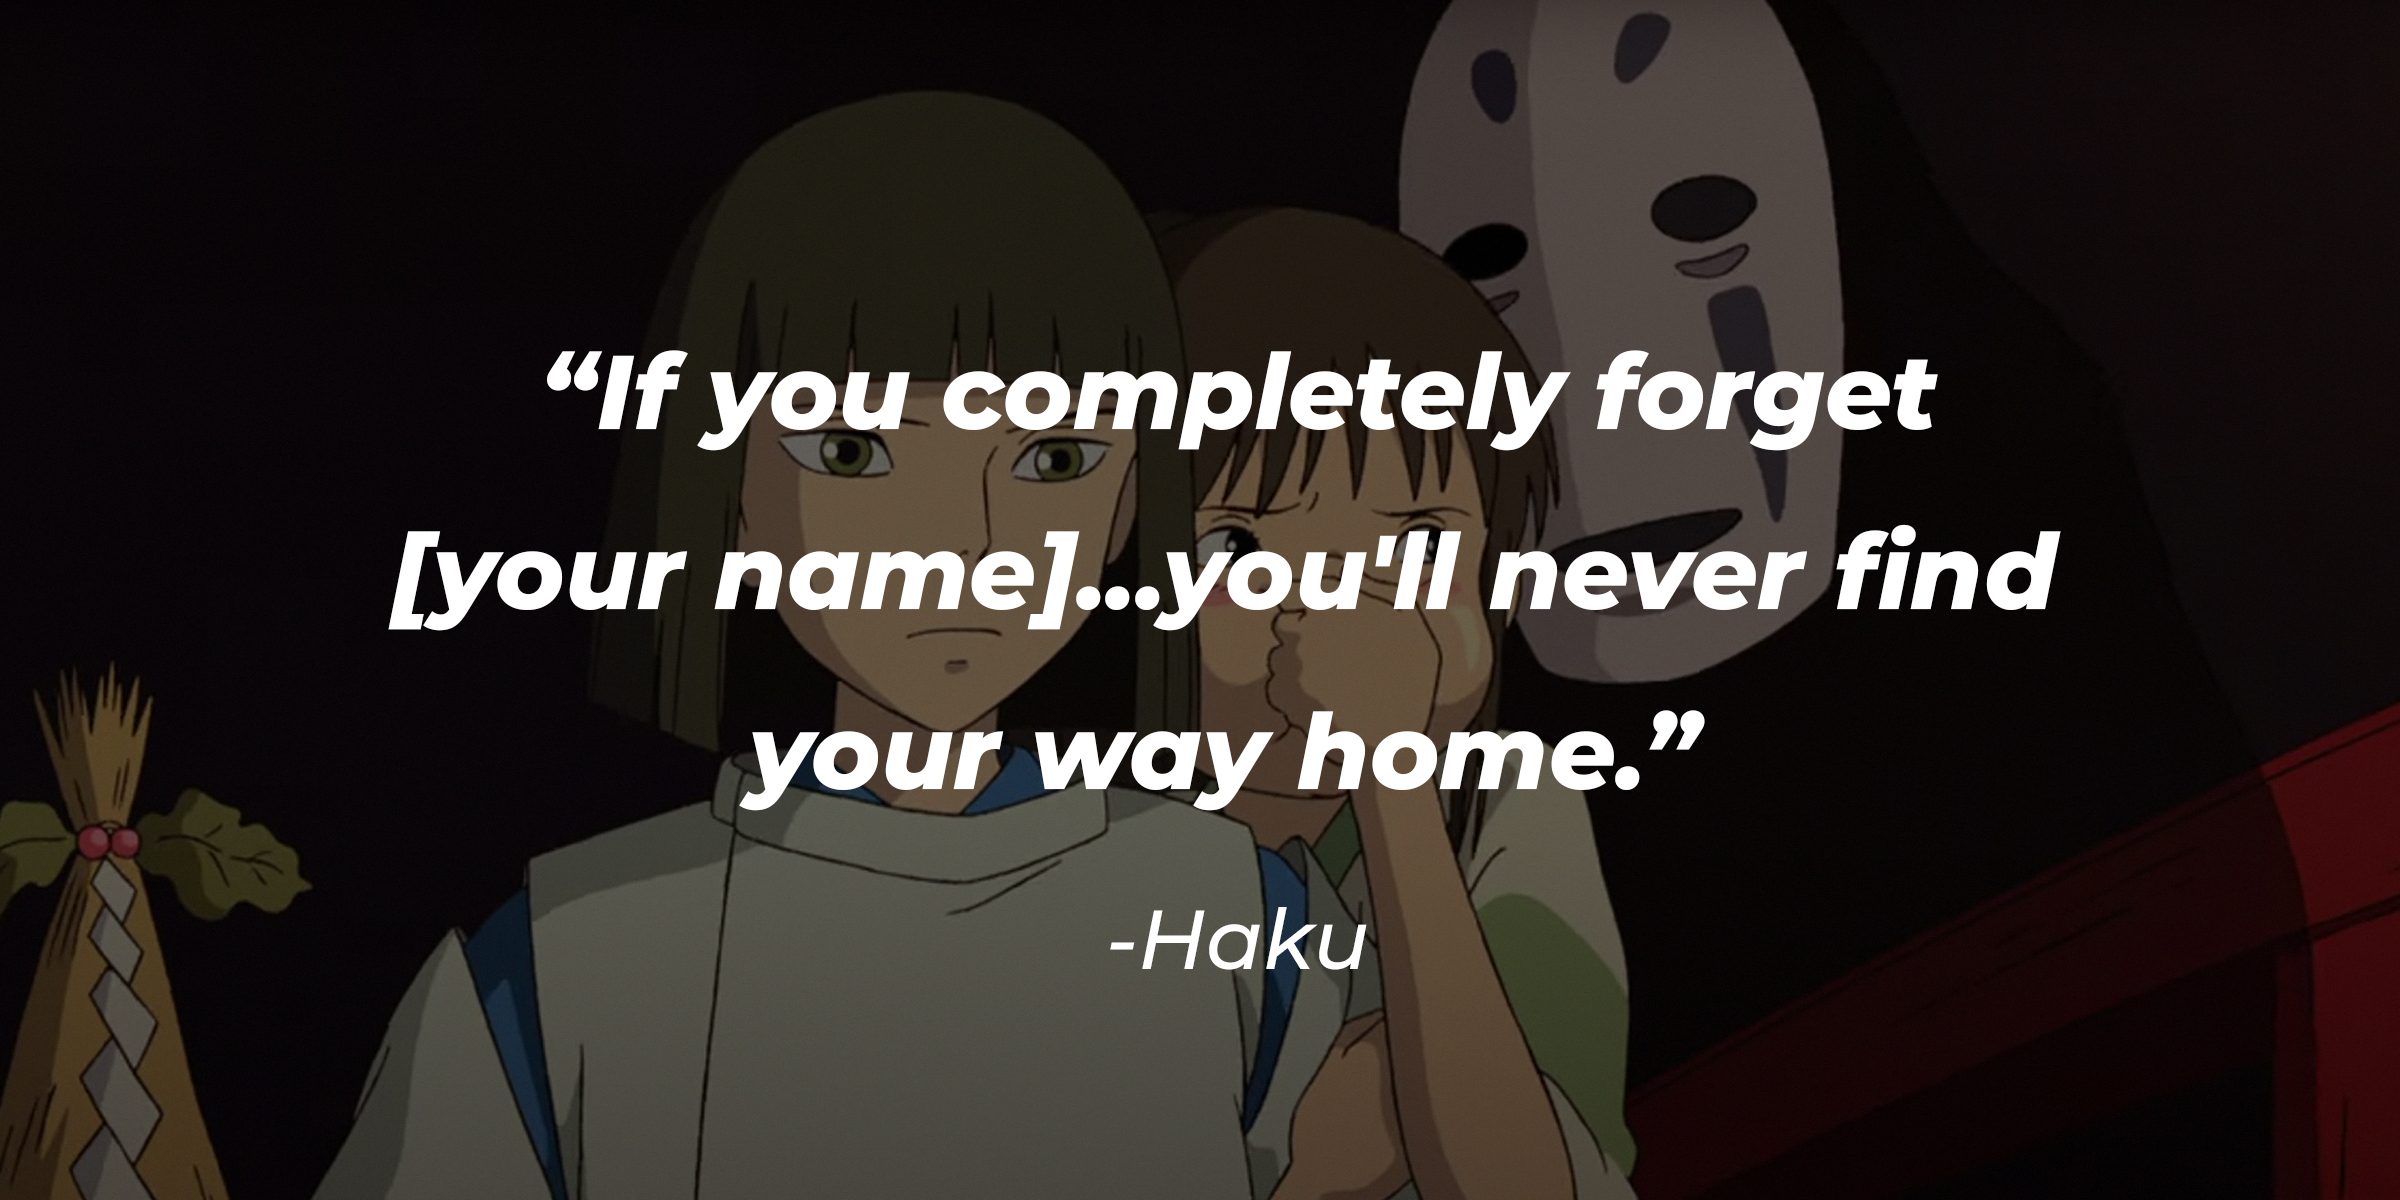 Chihiro, Haku, and No-Face with Haku’s quote: “If you completely forget [your name]...you'll never find your way home." | Source: youtube.com/netflixanime